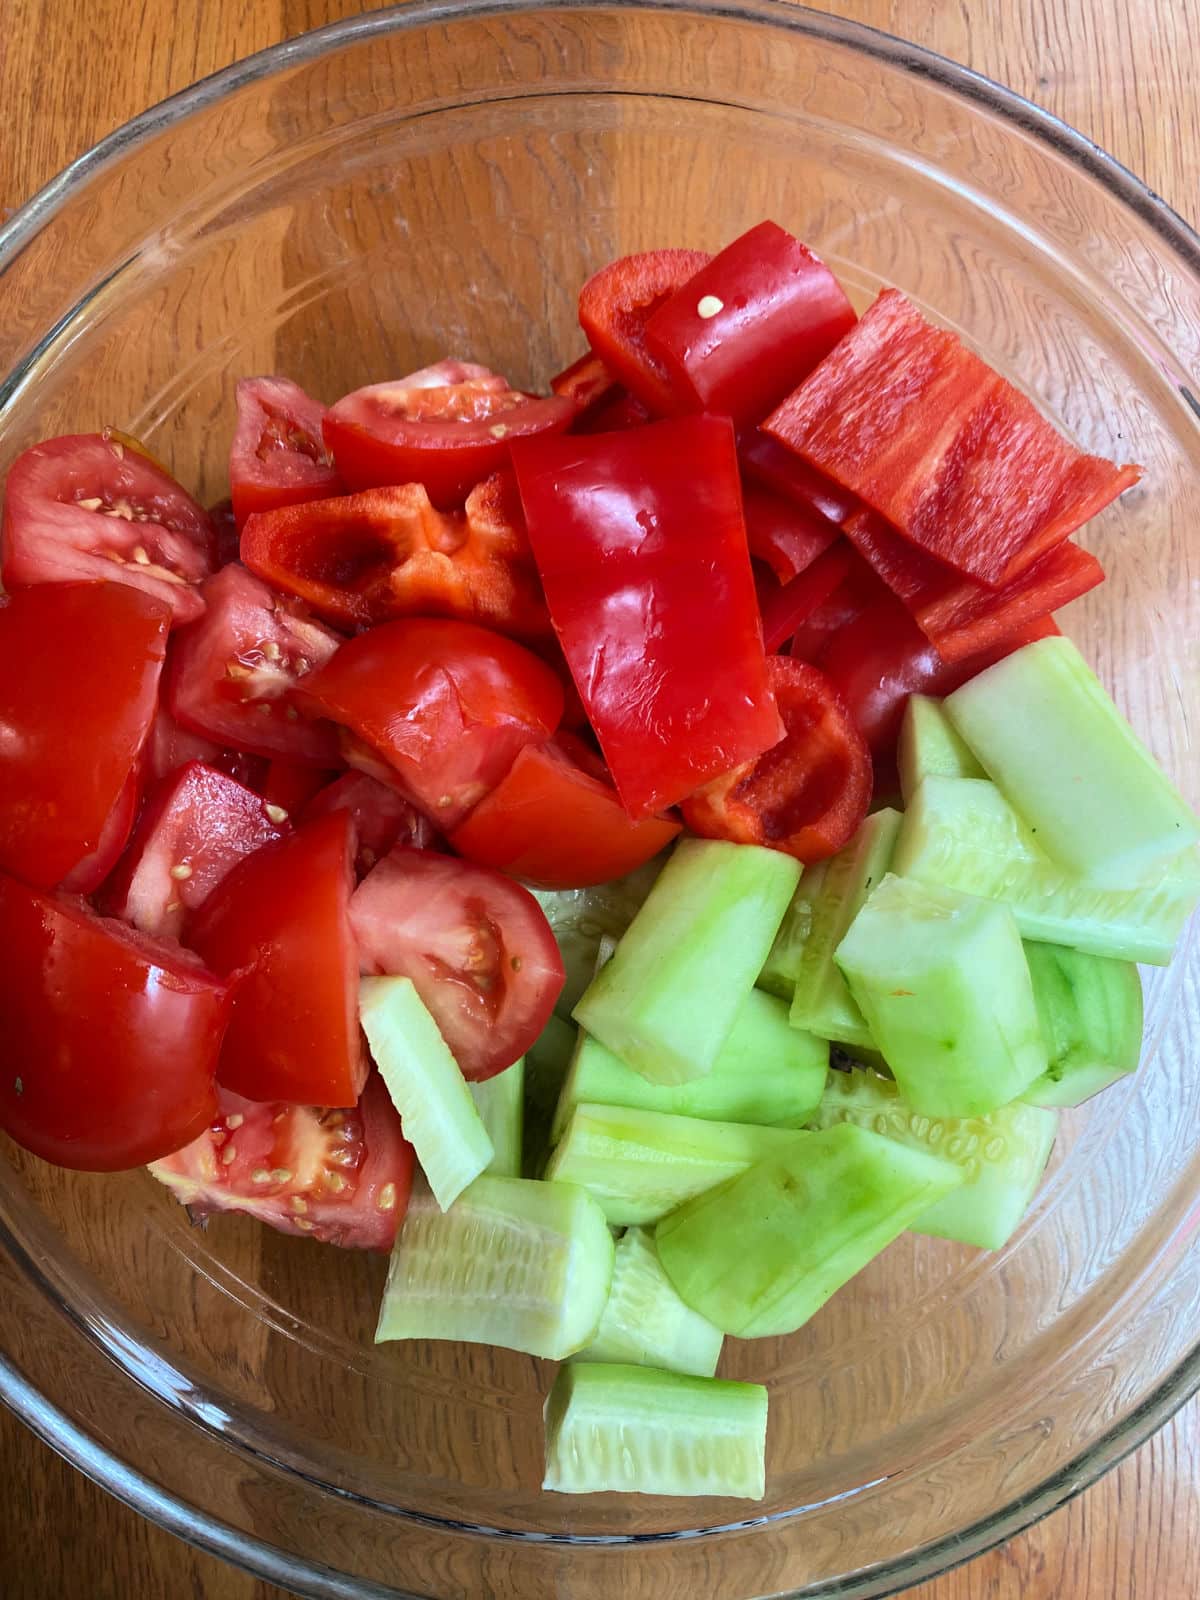 tomatoes, cucumbers and peppers in a bowl